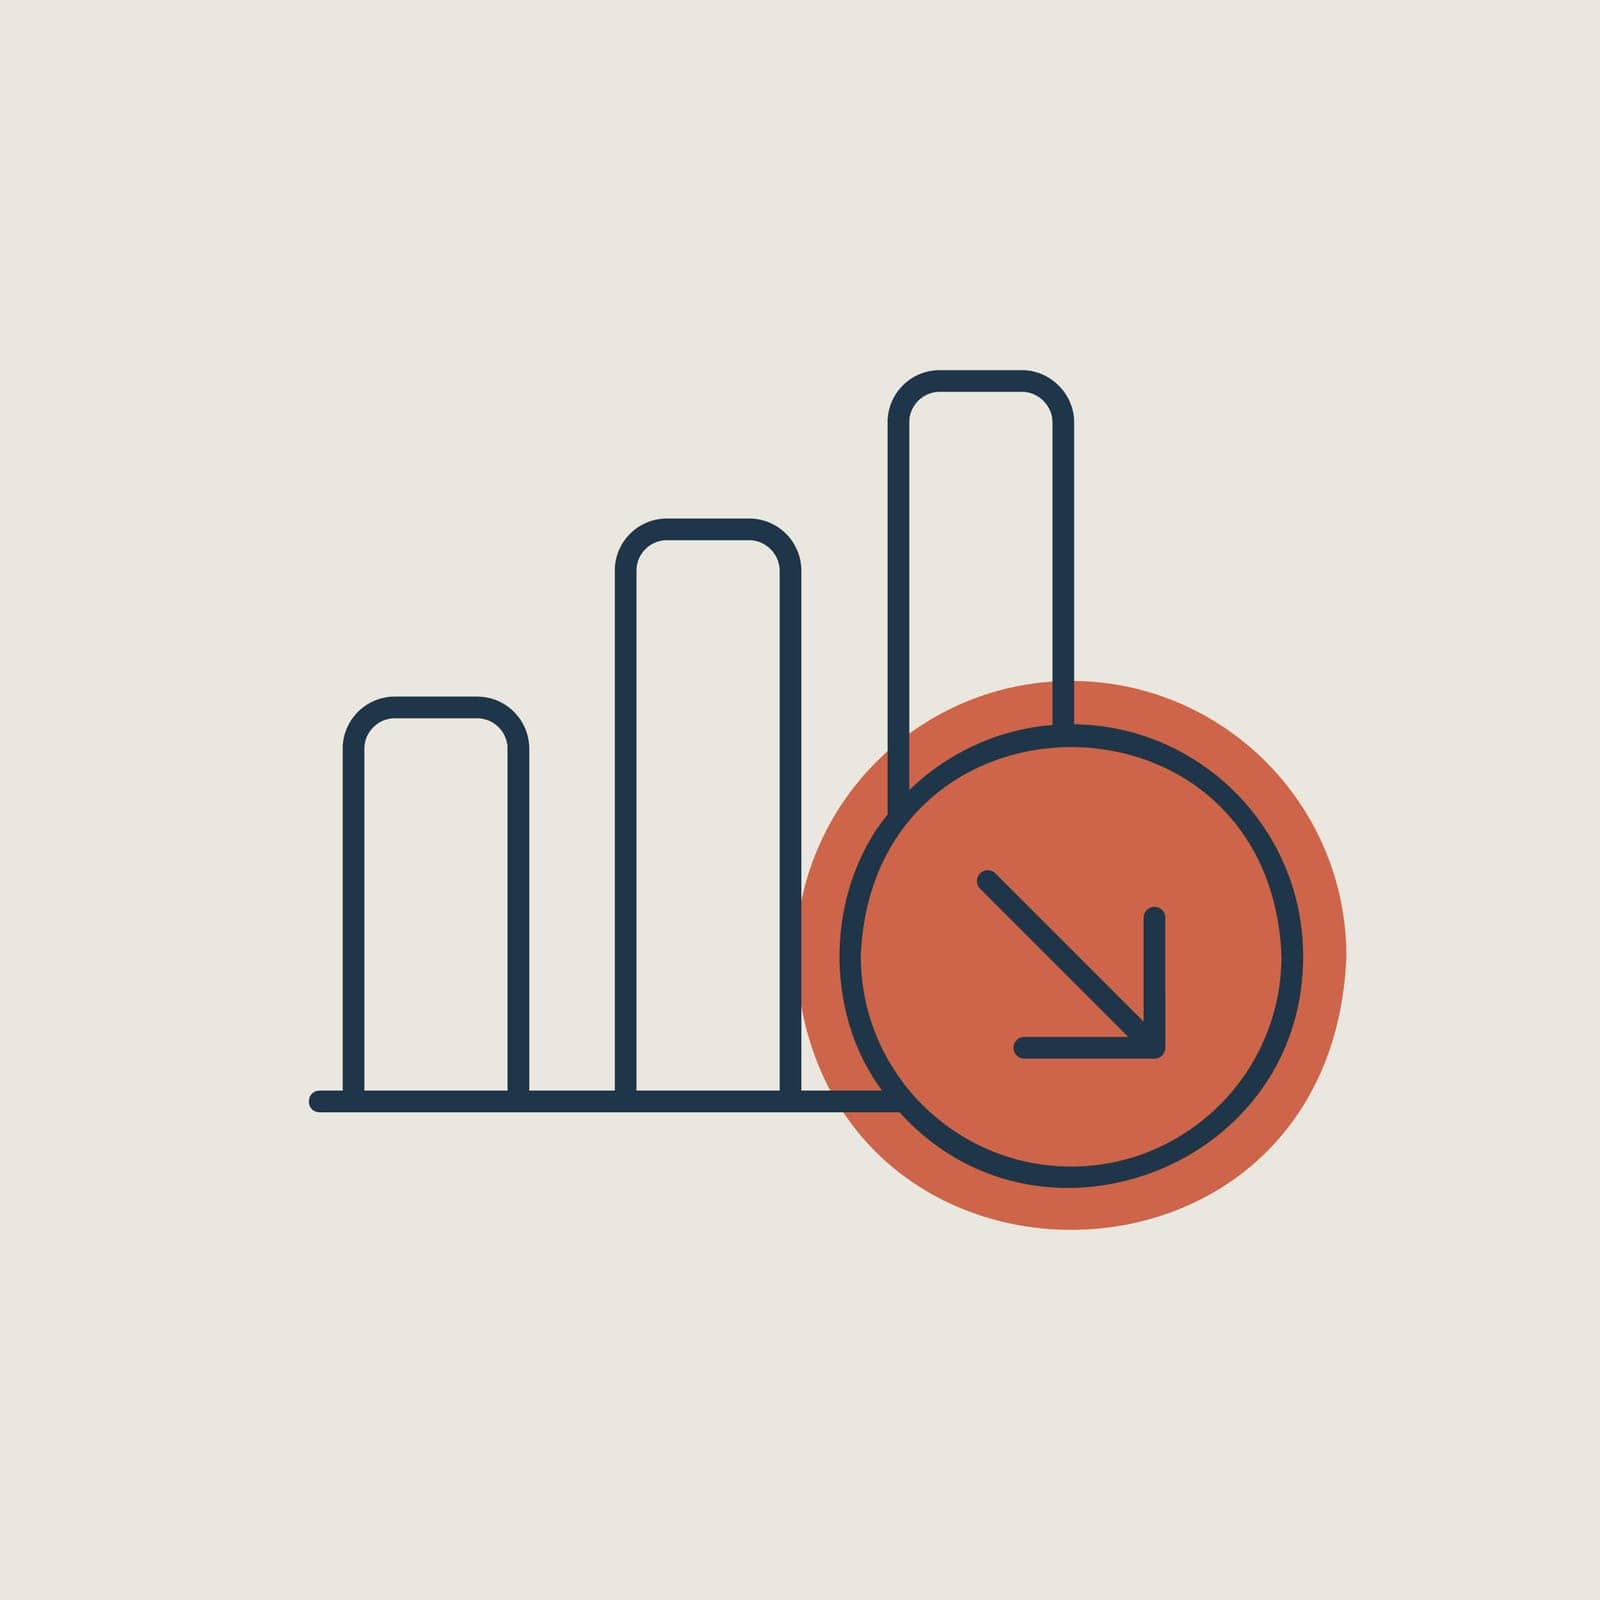 Decrease outline icon. Office sign by nosik